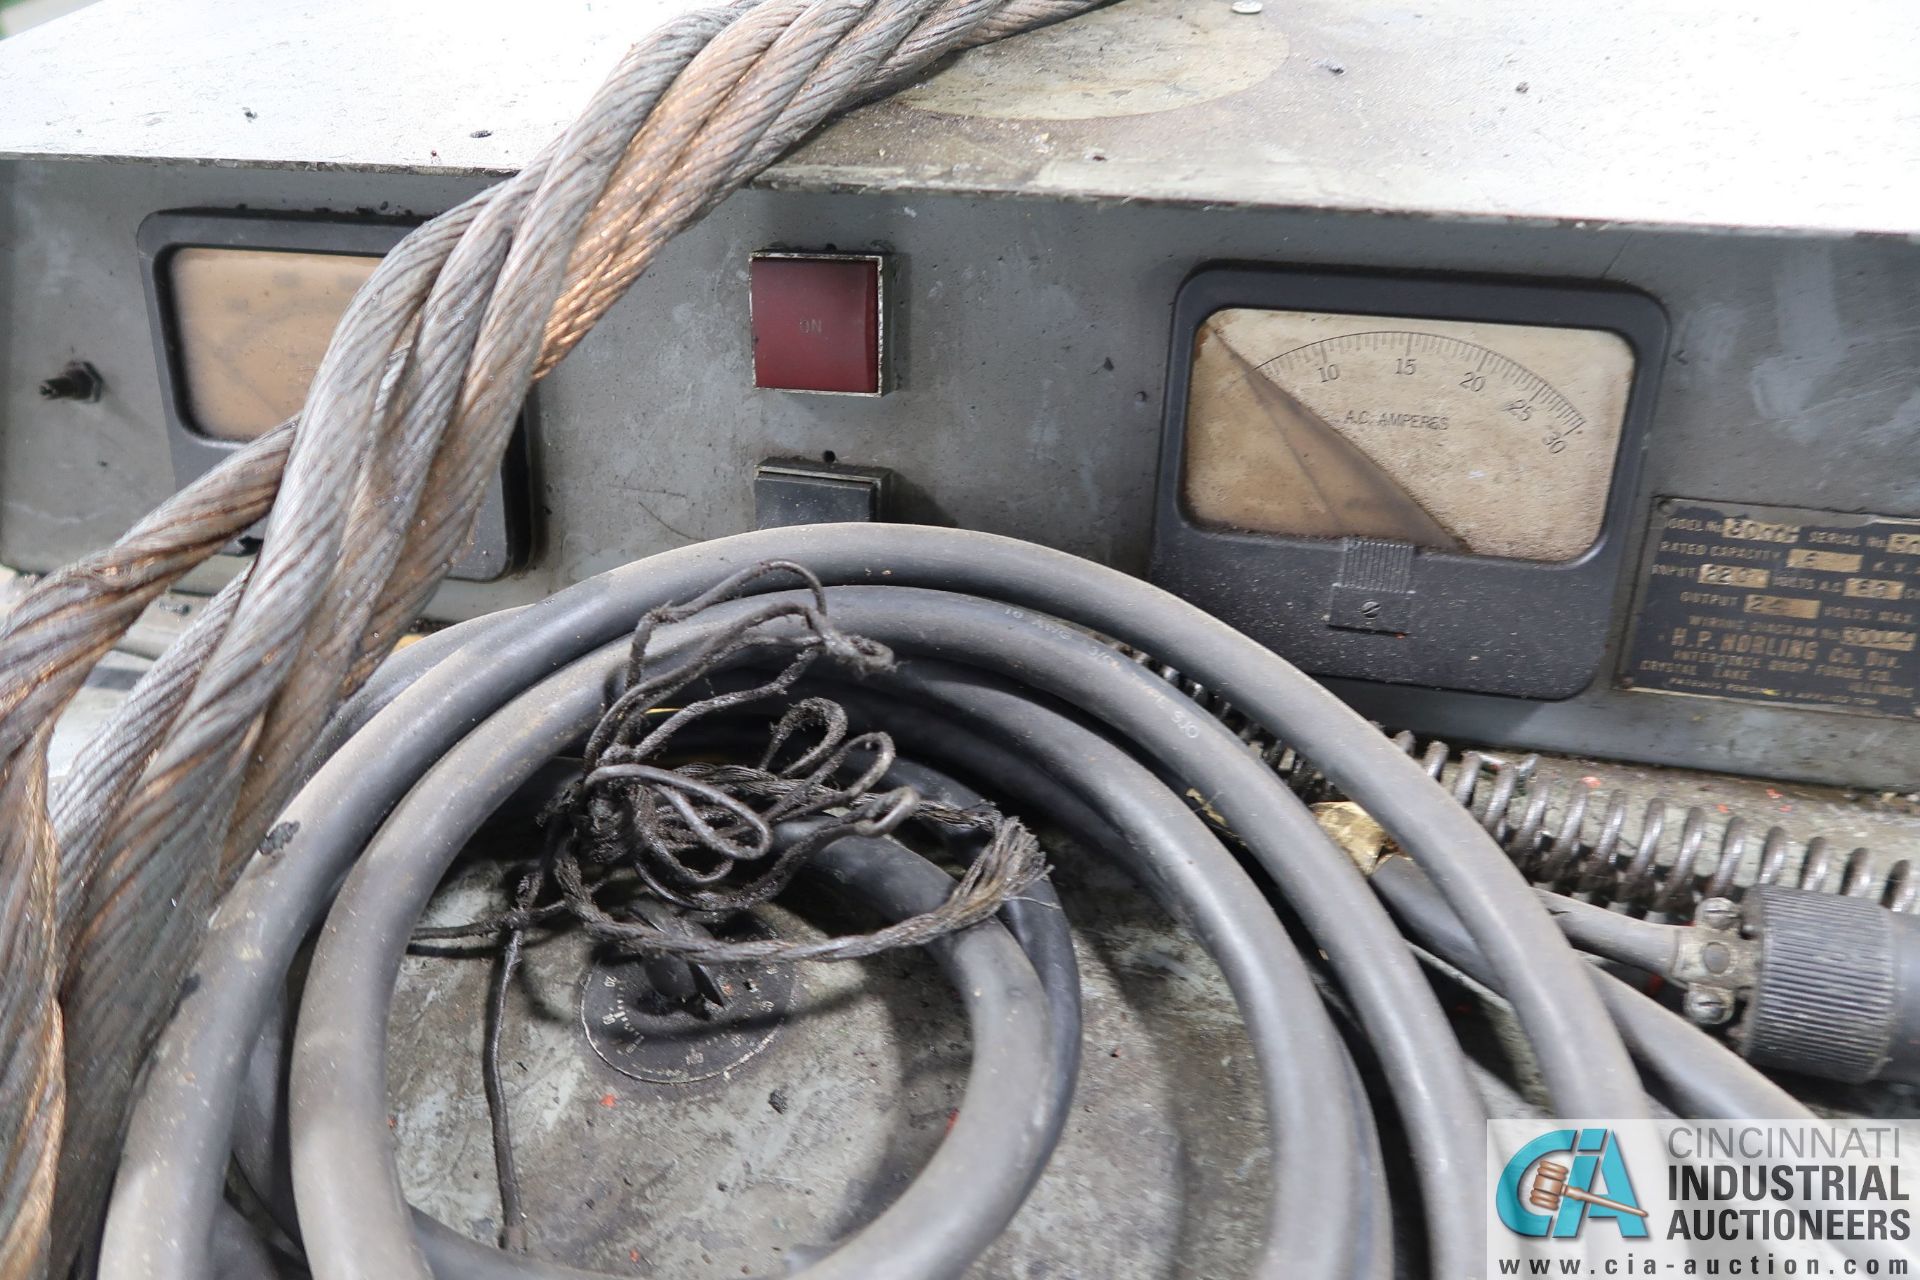 NORLING MODEL 3000H INDUCTION HEATER - Loading fee due the “ERRA” Pedowitz Machinery Movers $25.00 - Image 3 of 3